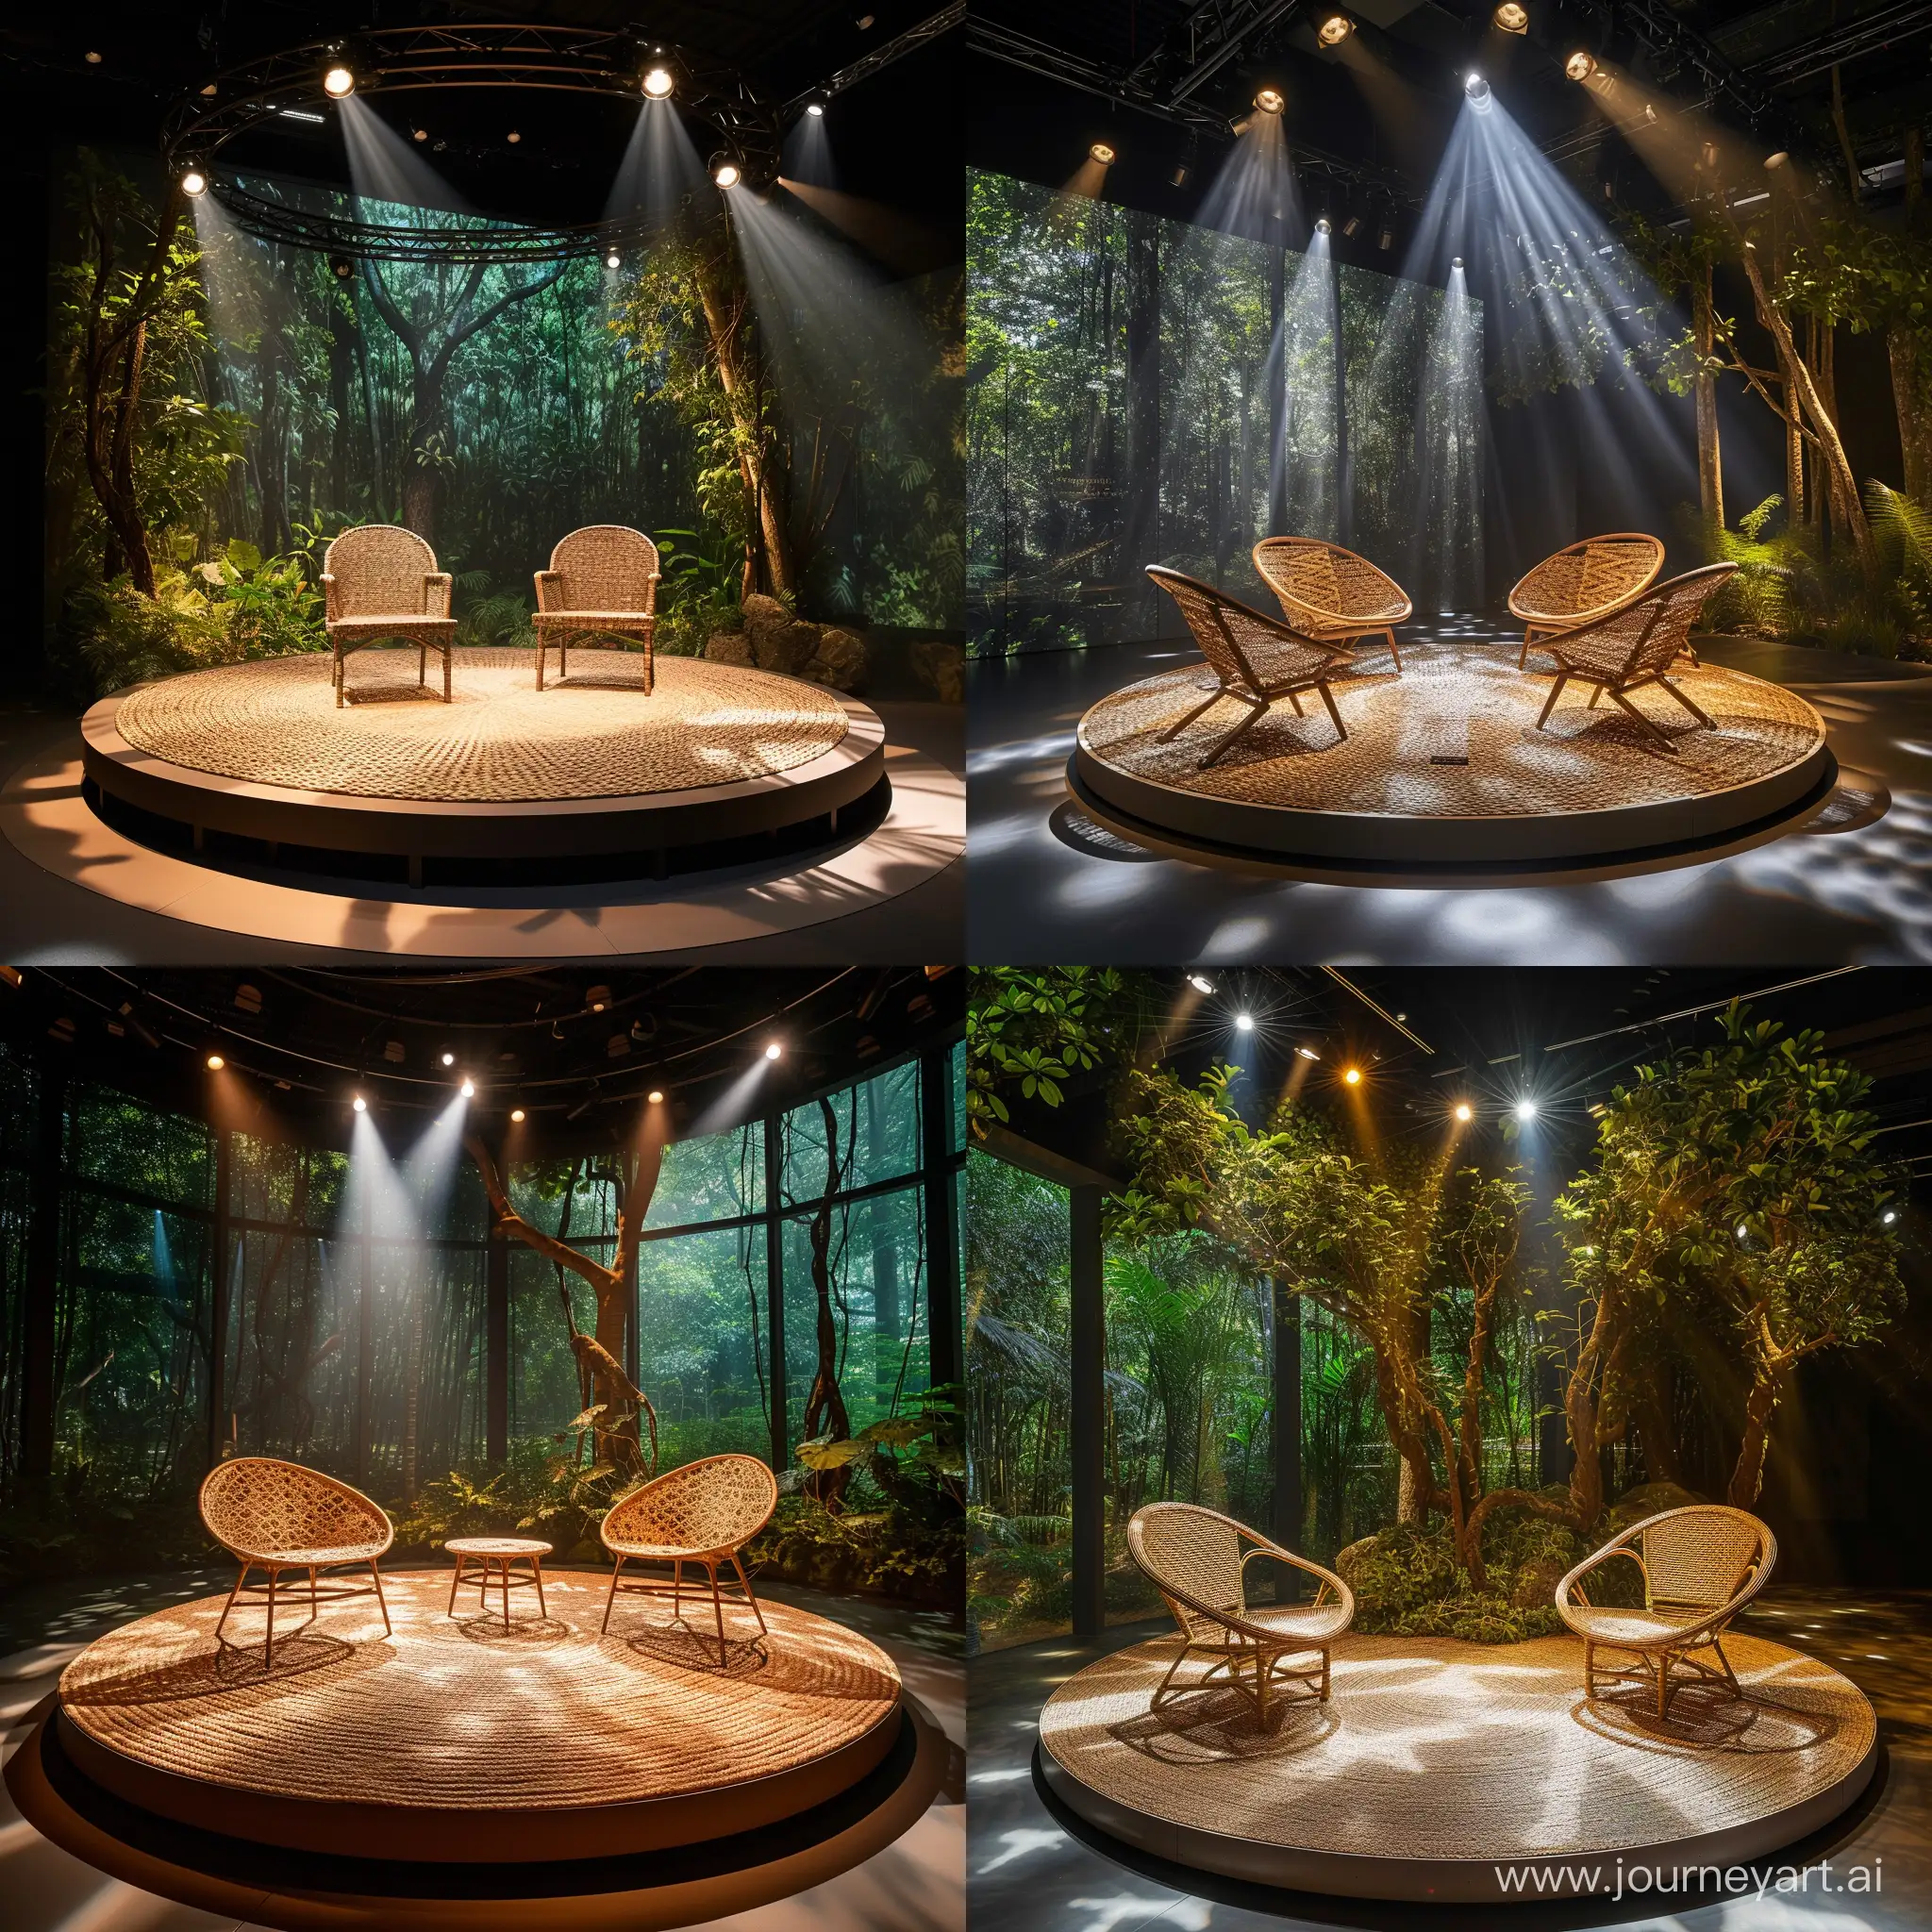 imagine small Safari Collection Zone
Design & Atmosphere:
This zone transports visitors to an outdoor safari environment, utilizing natural light and thematic elements to create an immersive experience.
Key Features:
Display Platform:
Shape: Circular, symbolizing the unity and cyclic nature of ecosystems.
Dimensions: 2m in diameter, elevated 20cm above the ground.
Material: The platform's frame is made from recycled aluminum, with a surface of intricately woven plant fibers, showcasing craftsmanship and sustainability.
Spotlights:
Positioned to simulate sunlight filtering through trees, casting dynamic shadows and highlighting the chairs' features.
Lighting:
A combination of natural daylight from nearby windows and focused LED spotlights creates a vivid, lifelike ambiance.realistic style